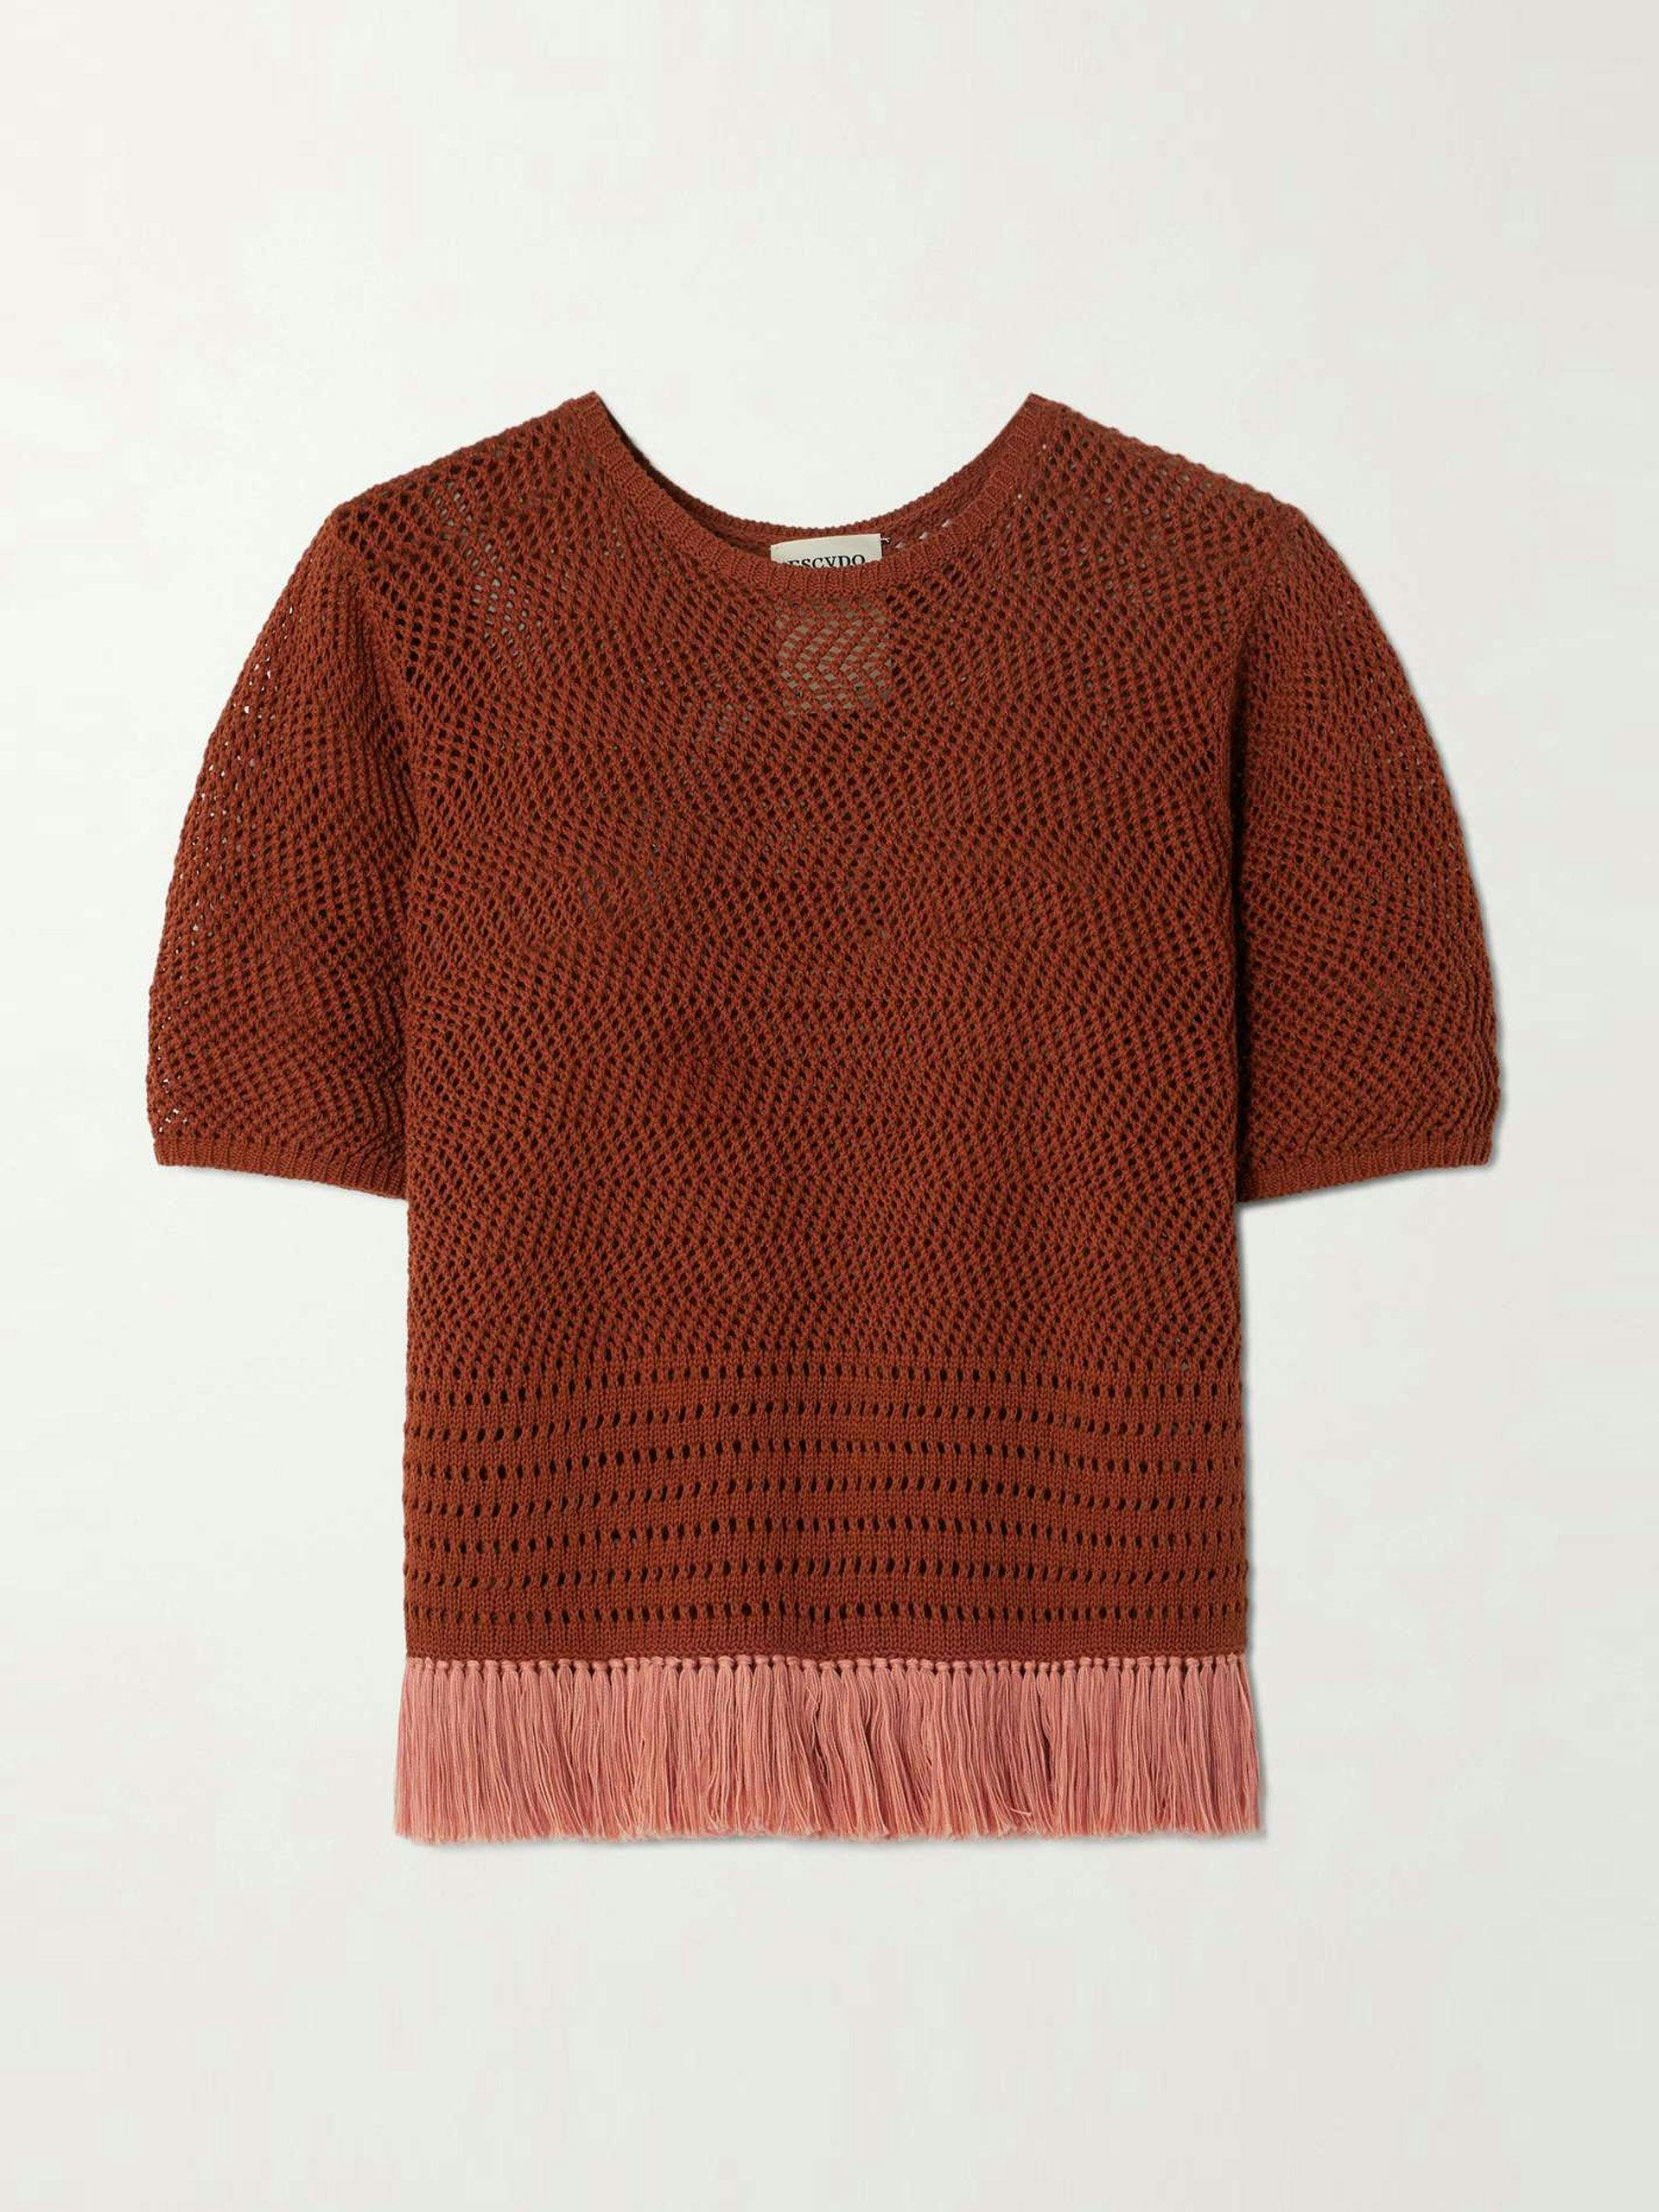 Carisa fringed open-knit cotton top